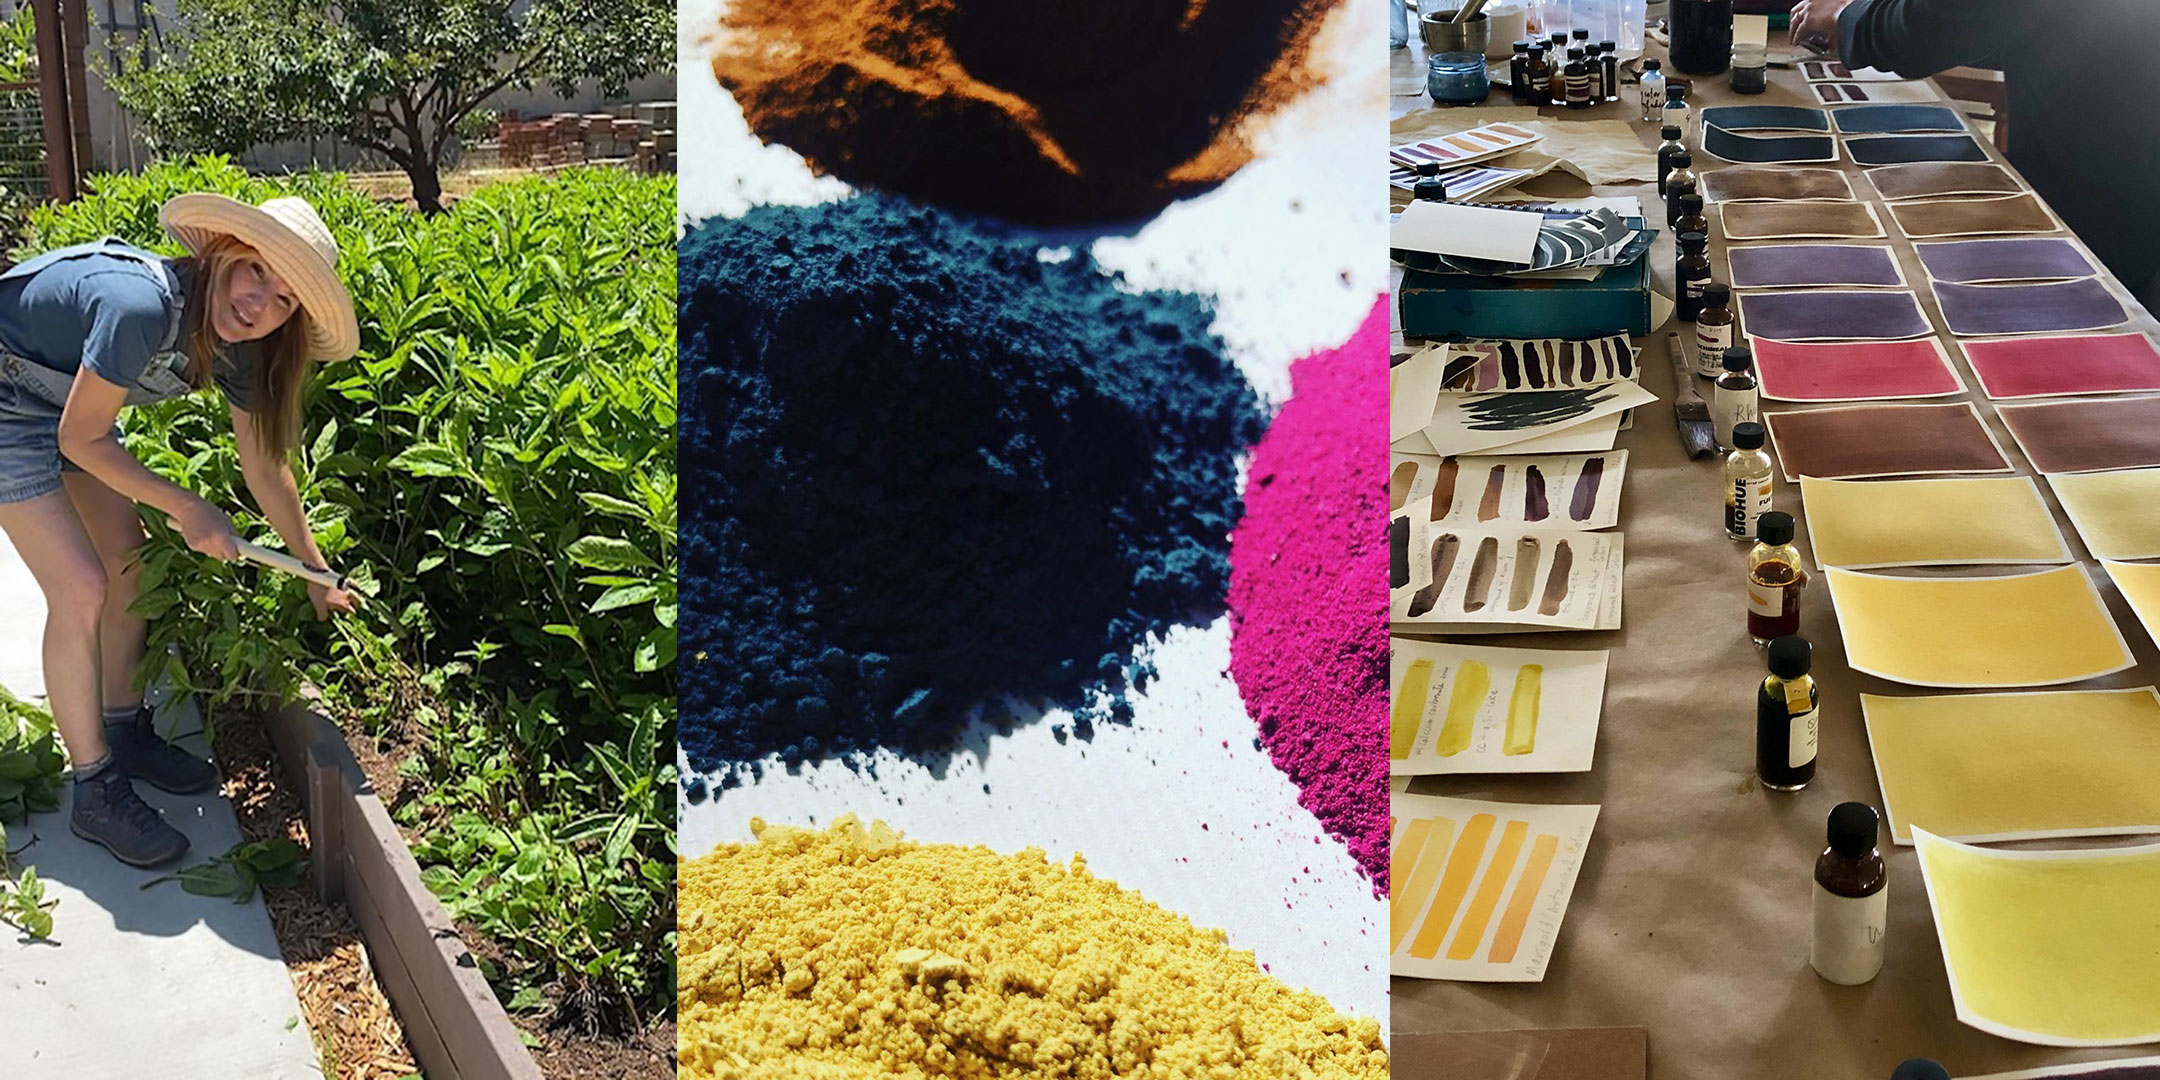 Judi working with indigo plants, colorful pigments and samples